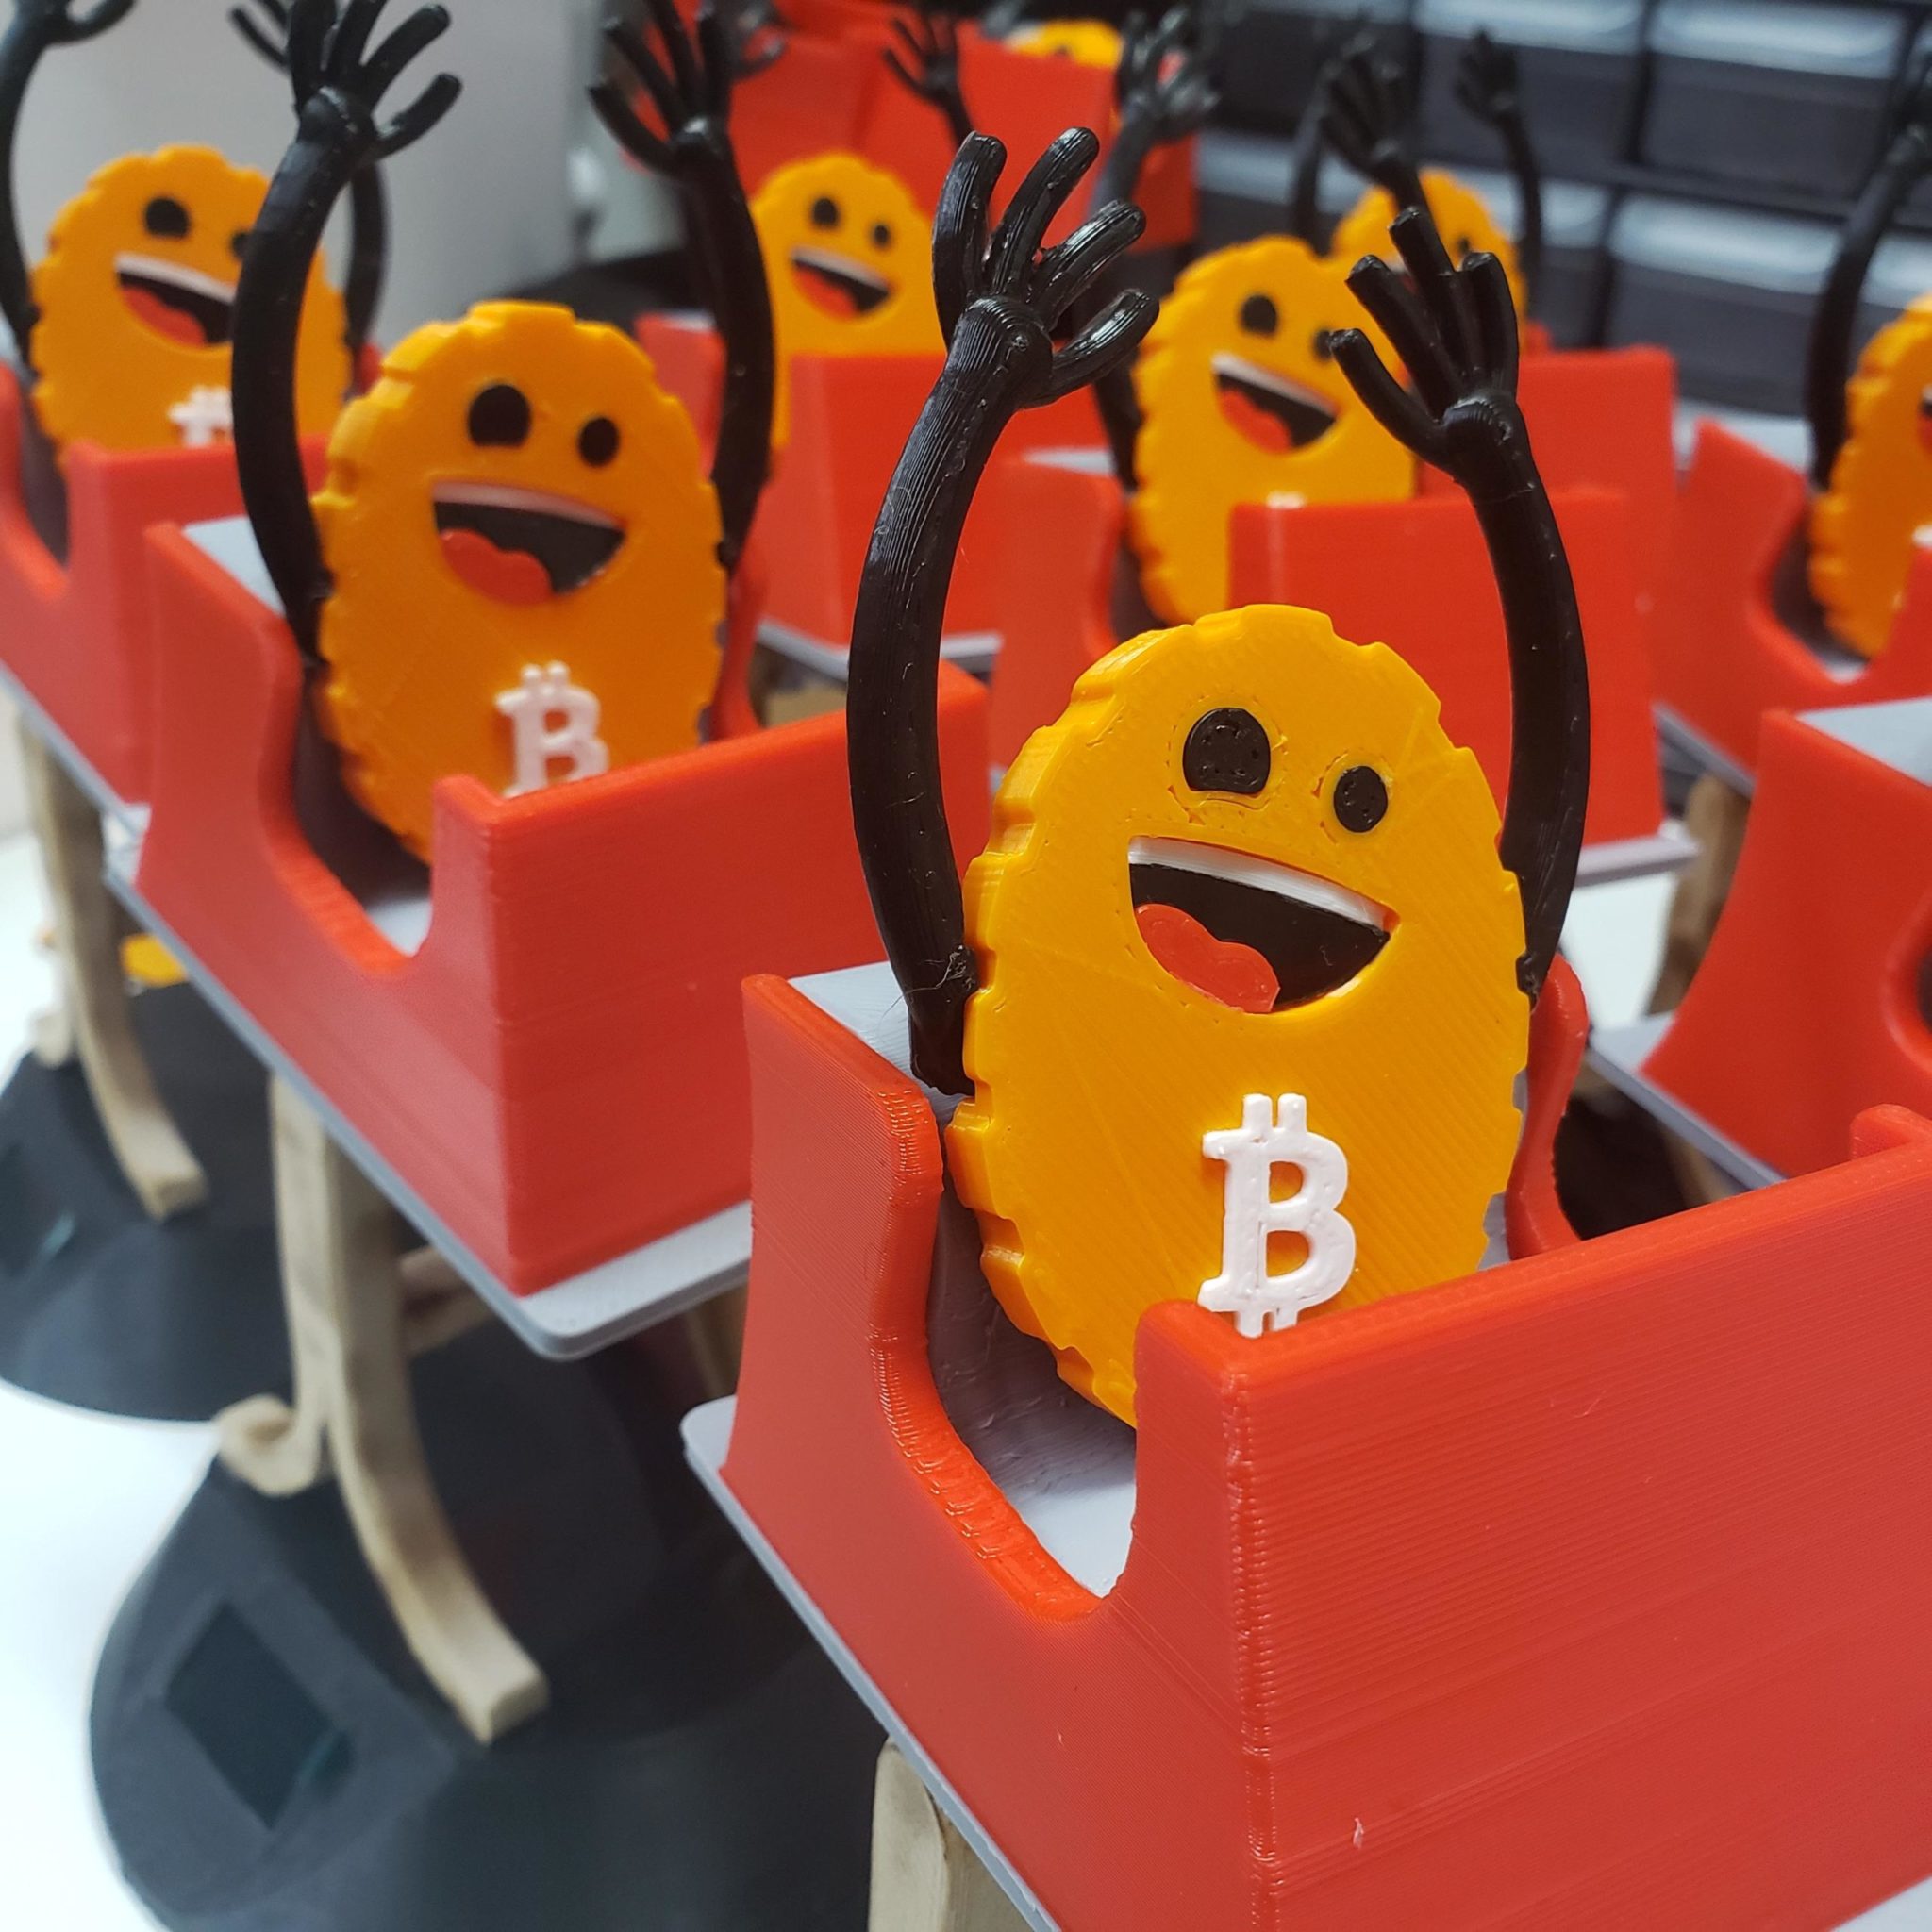 bitcoin rollercoaster toy